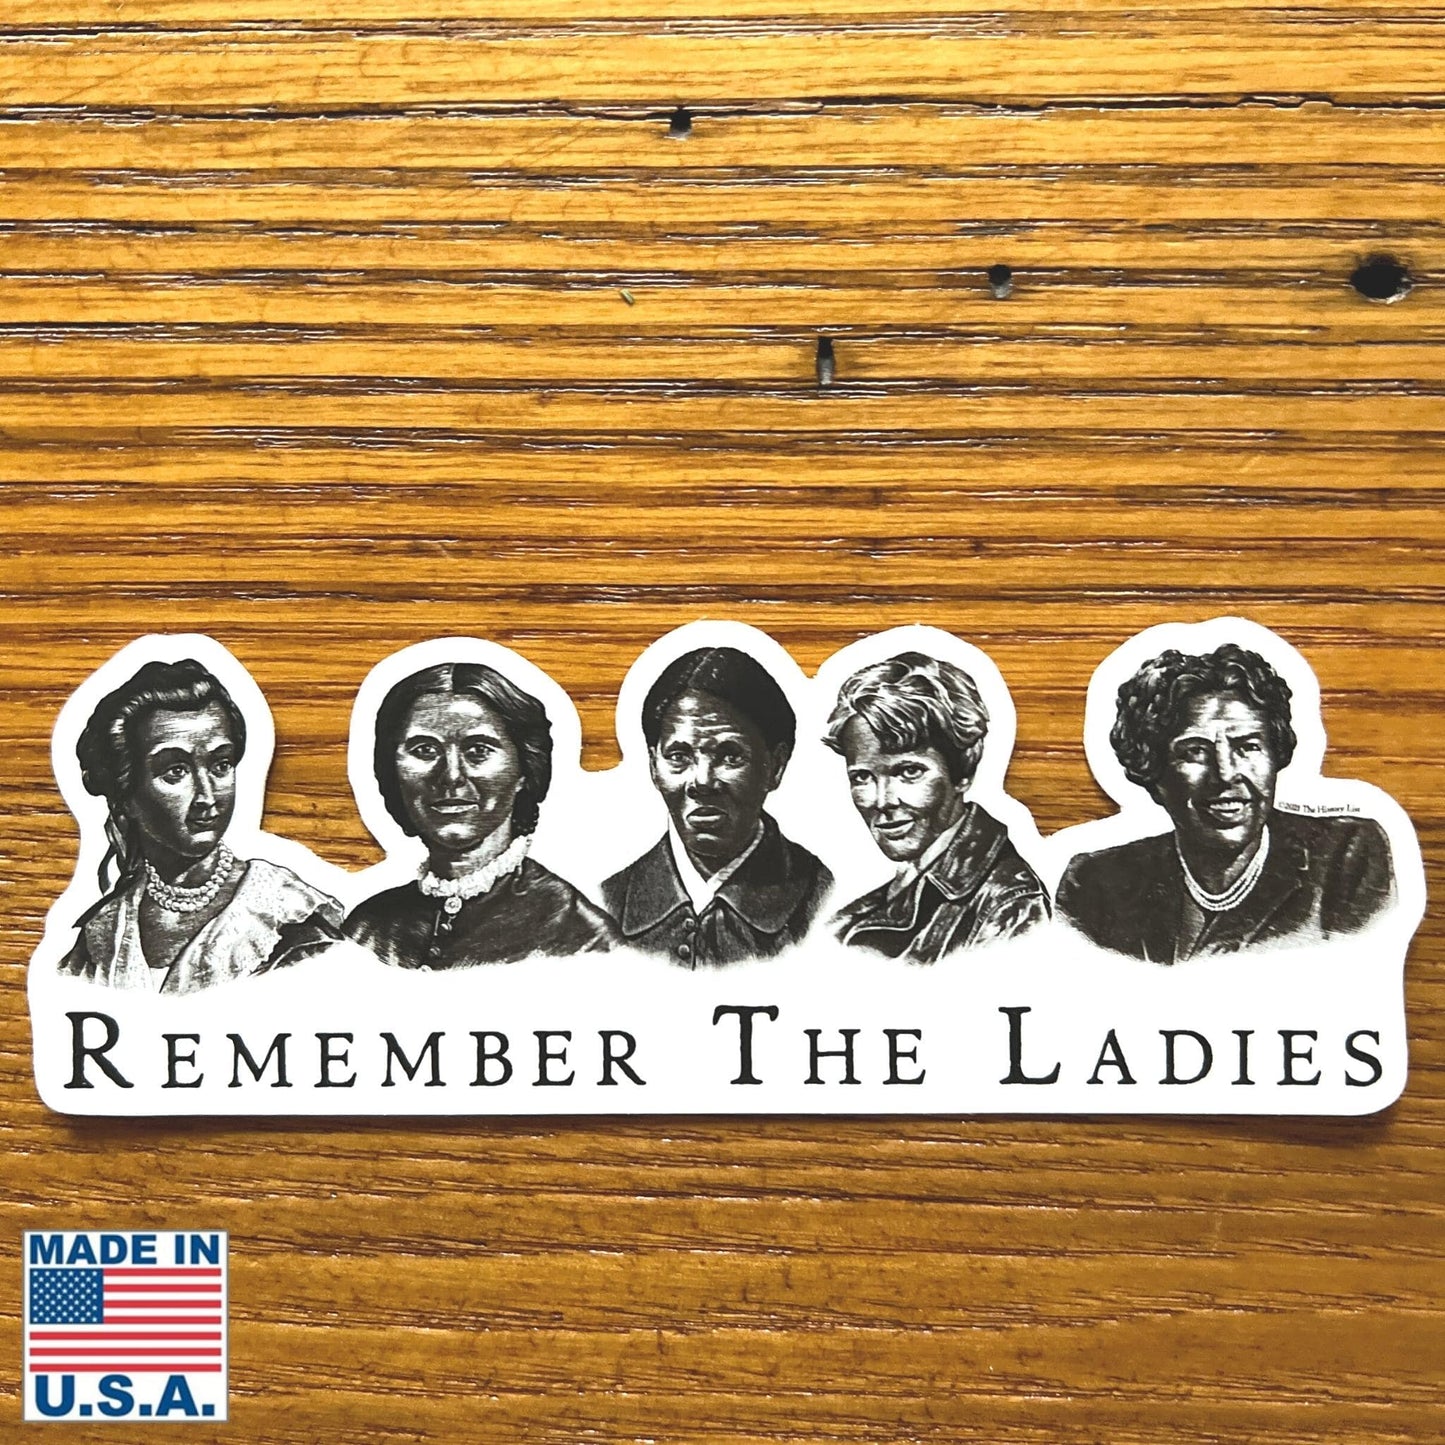 "Remember the Ladies" Sticker from The History List store